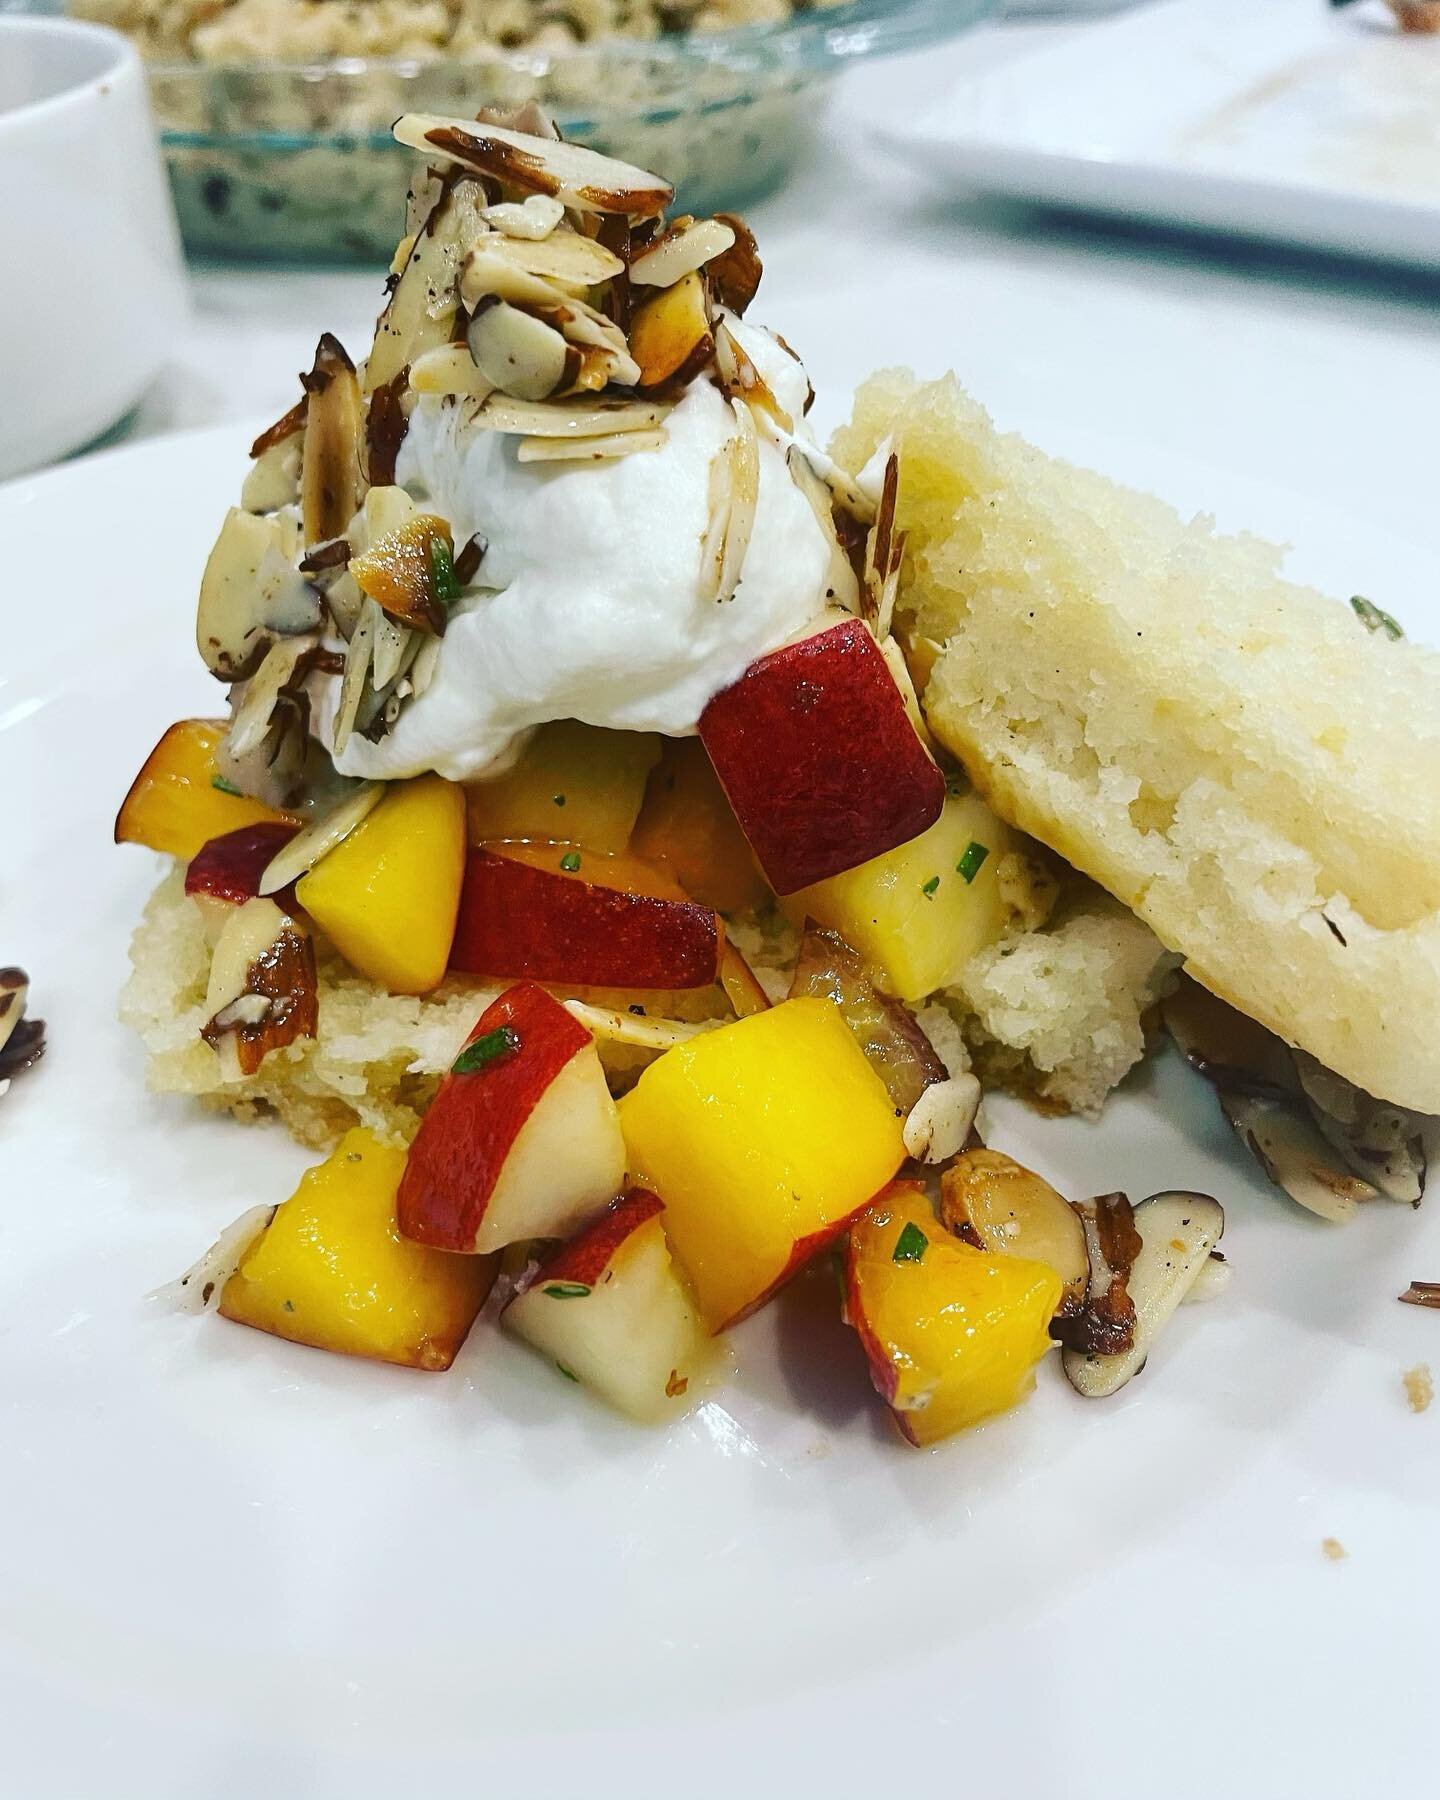 Hey y&rsquo;all!! It&rsquo;s Sarah, The Carolina Chef, giving you another tasty recipe to try. Plum Shortcakes. In the photo, I&rsquo;m using nectarines. You can actually use any stone fruit for this recipe if you don&rsquo;t like plums. Stone fruits